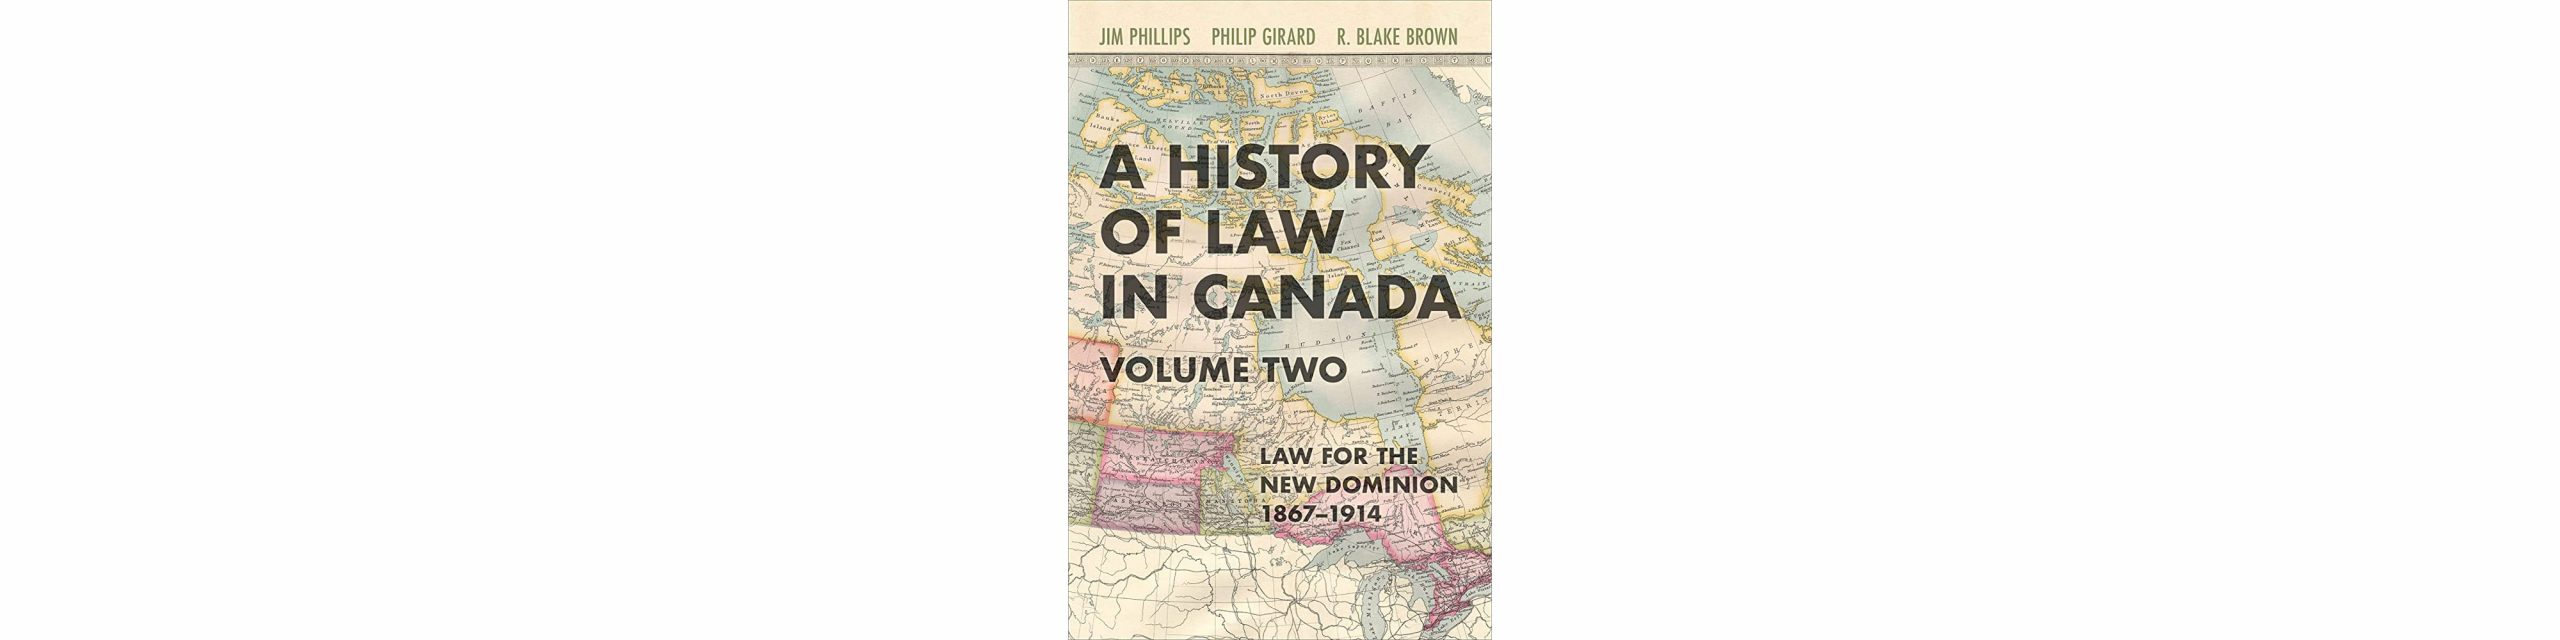 Image of book cover: A history of law in Canada volume 2